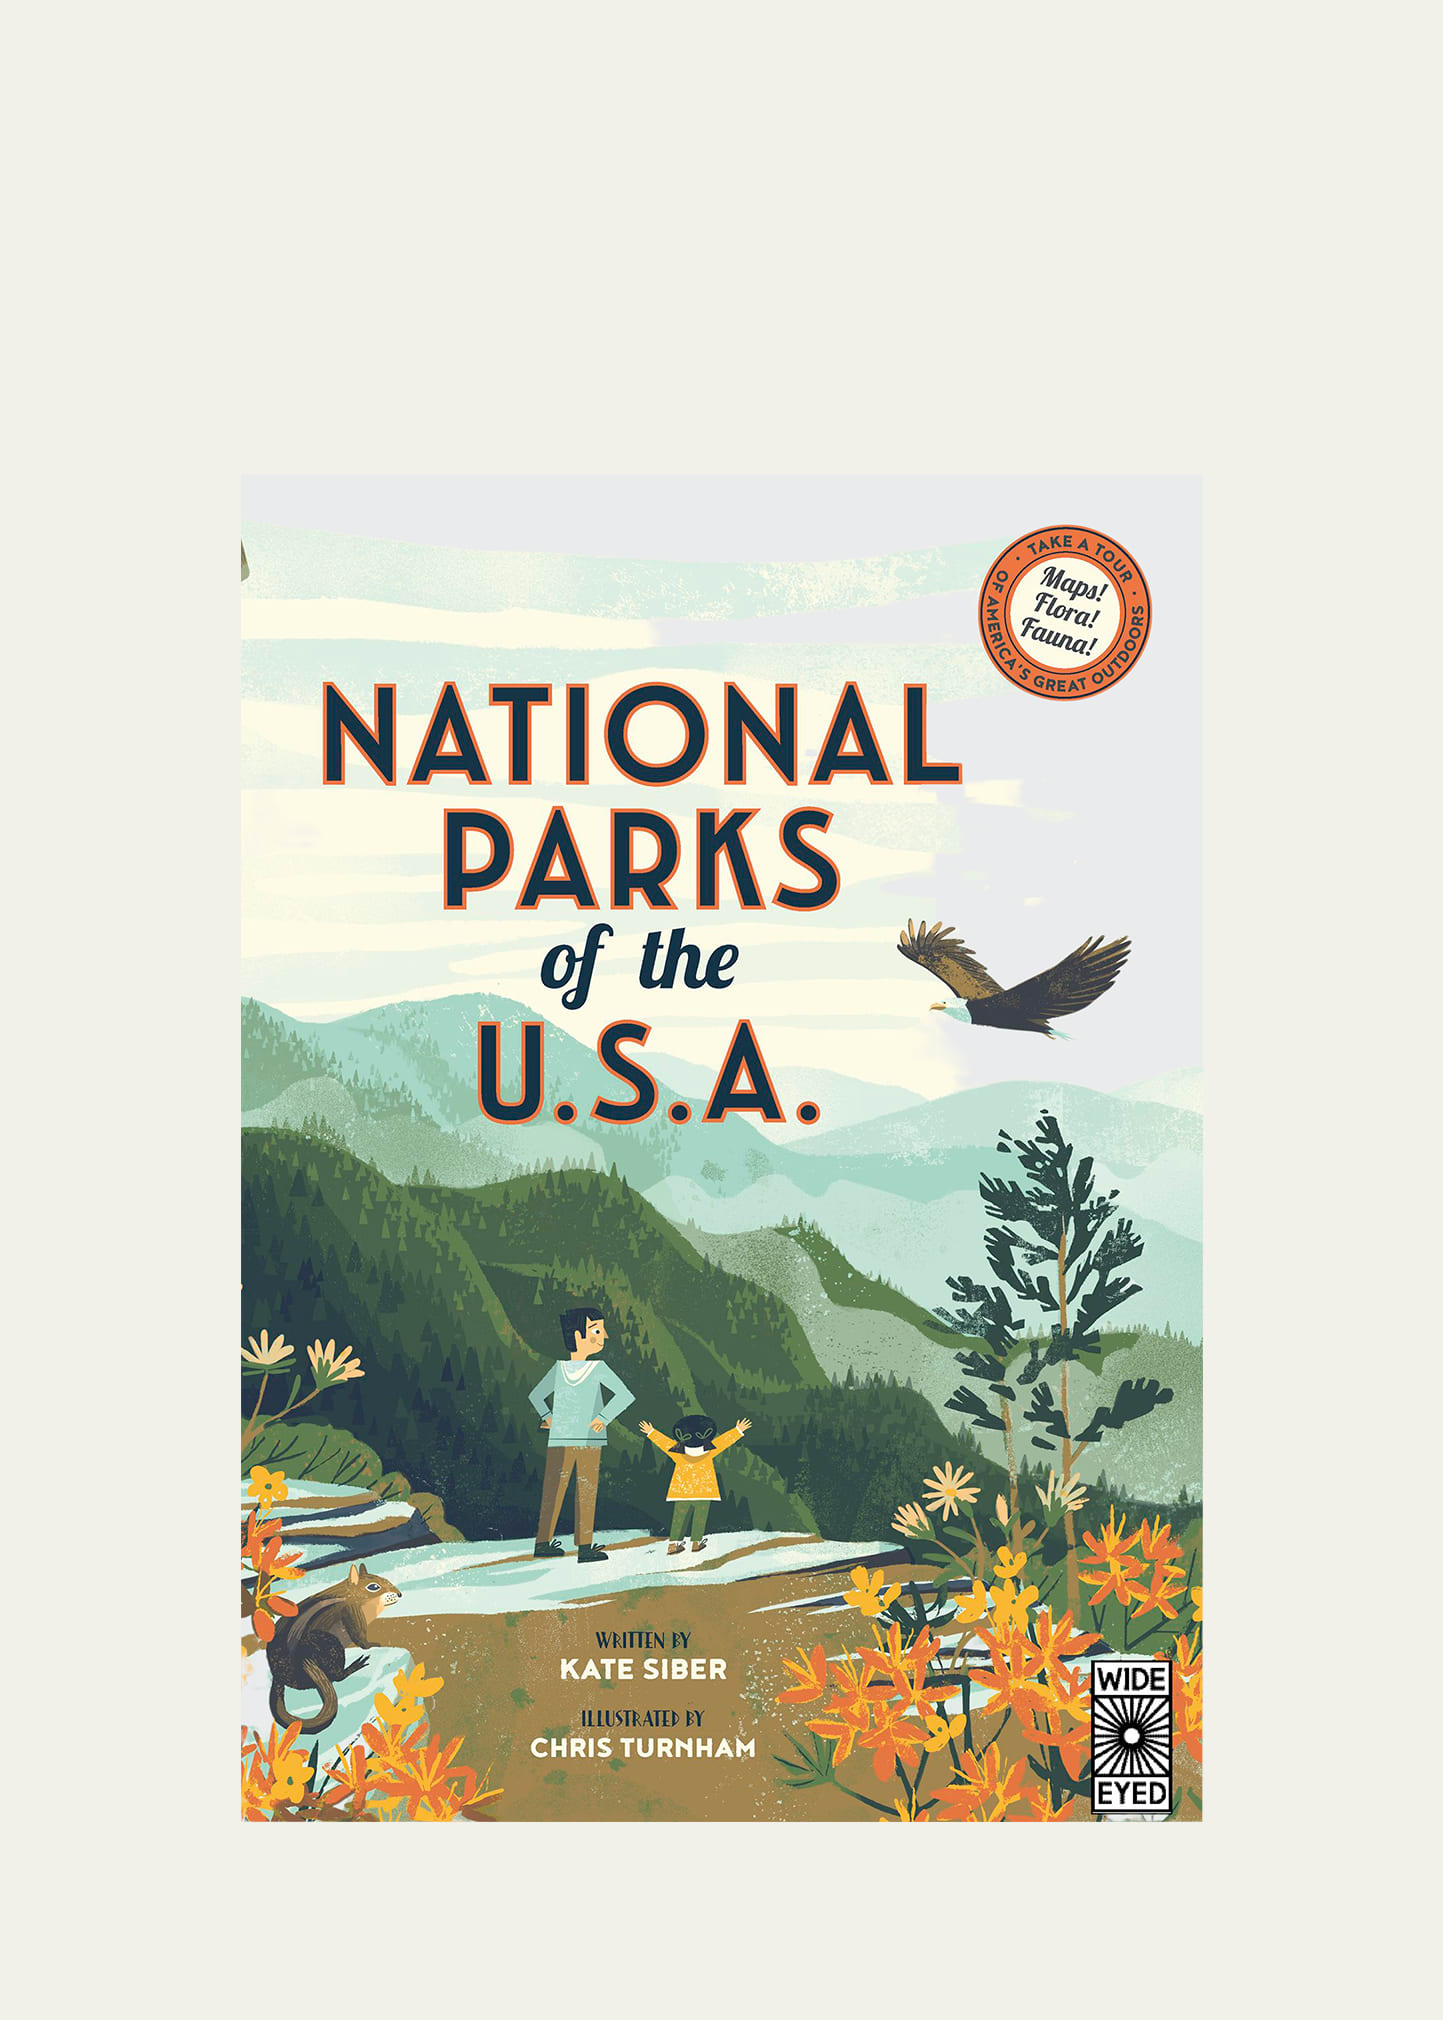 "National Parks of the USA" Book by Kate Siber & Chris Turnham